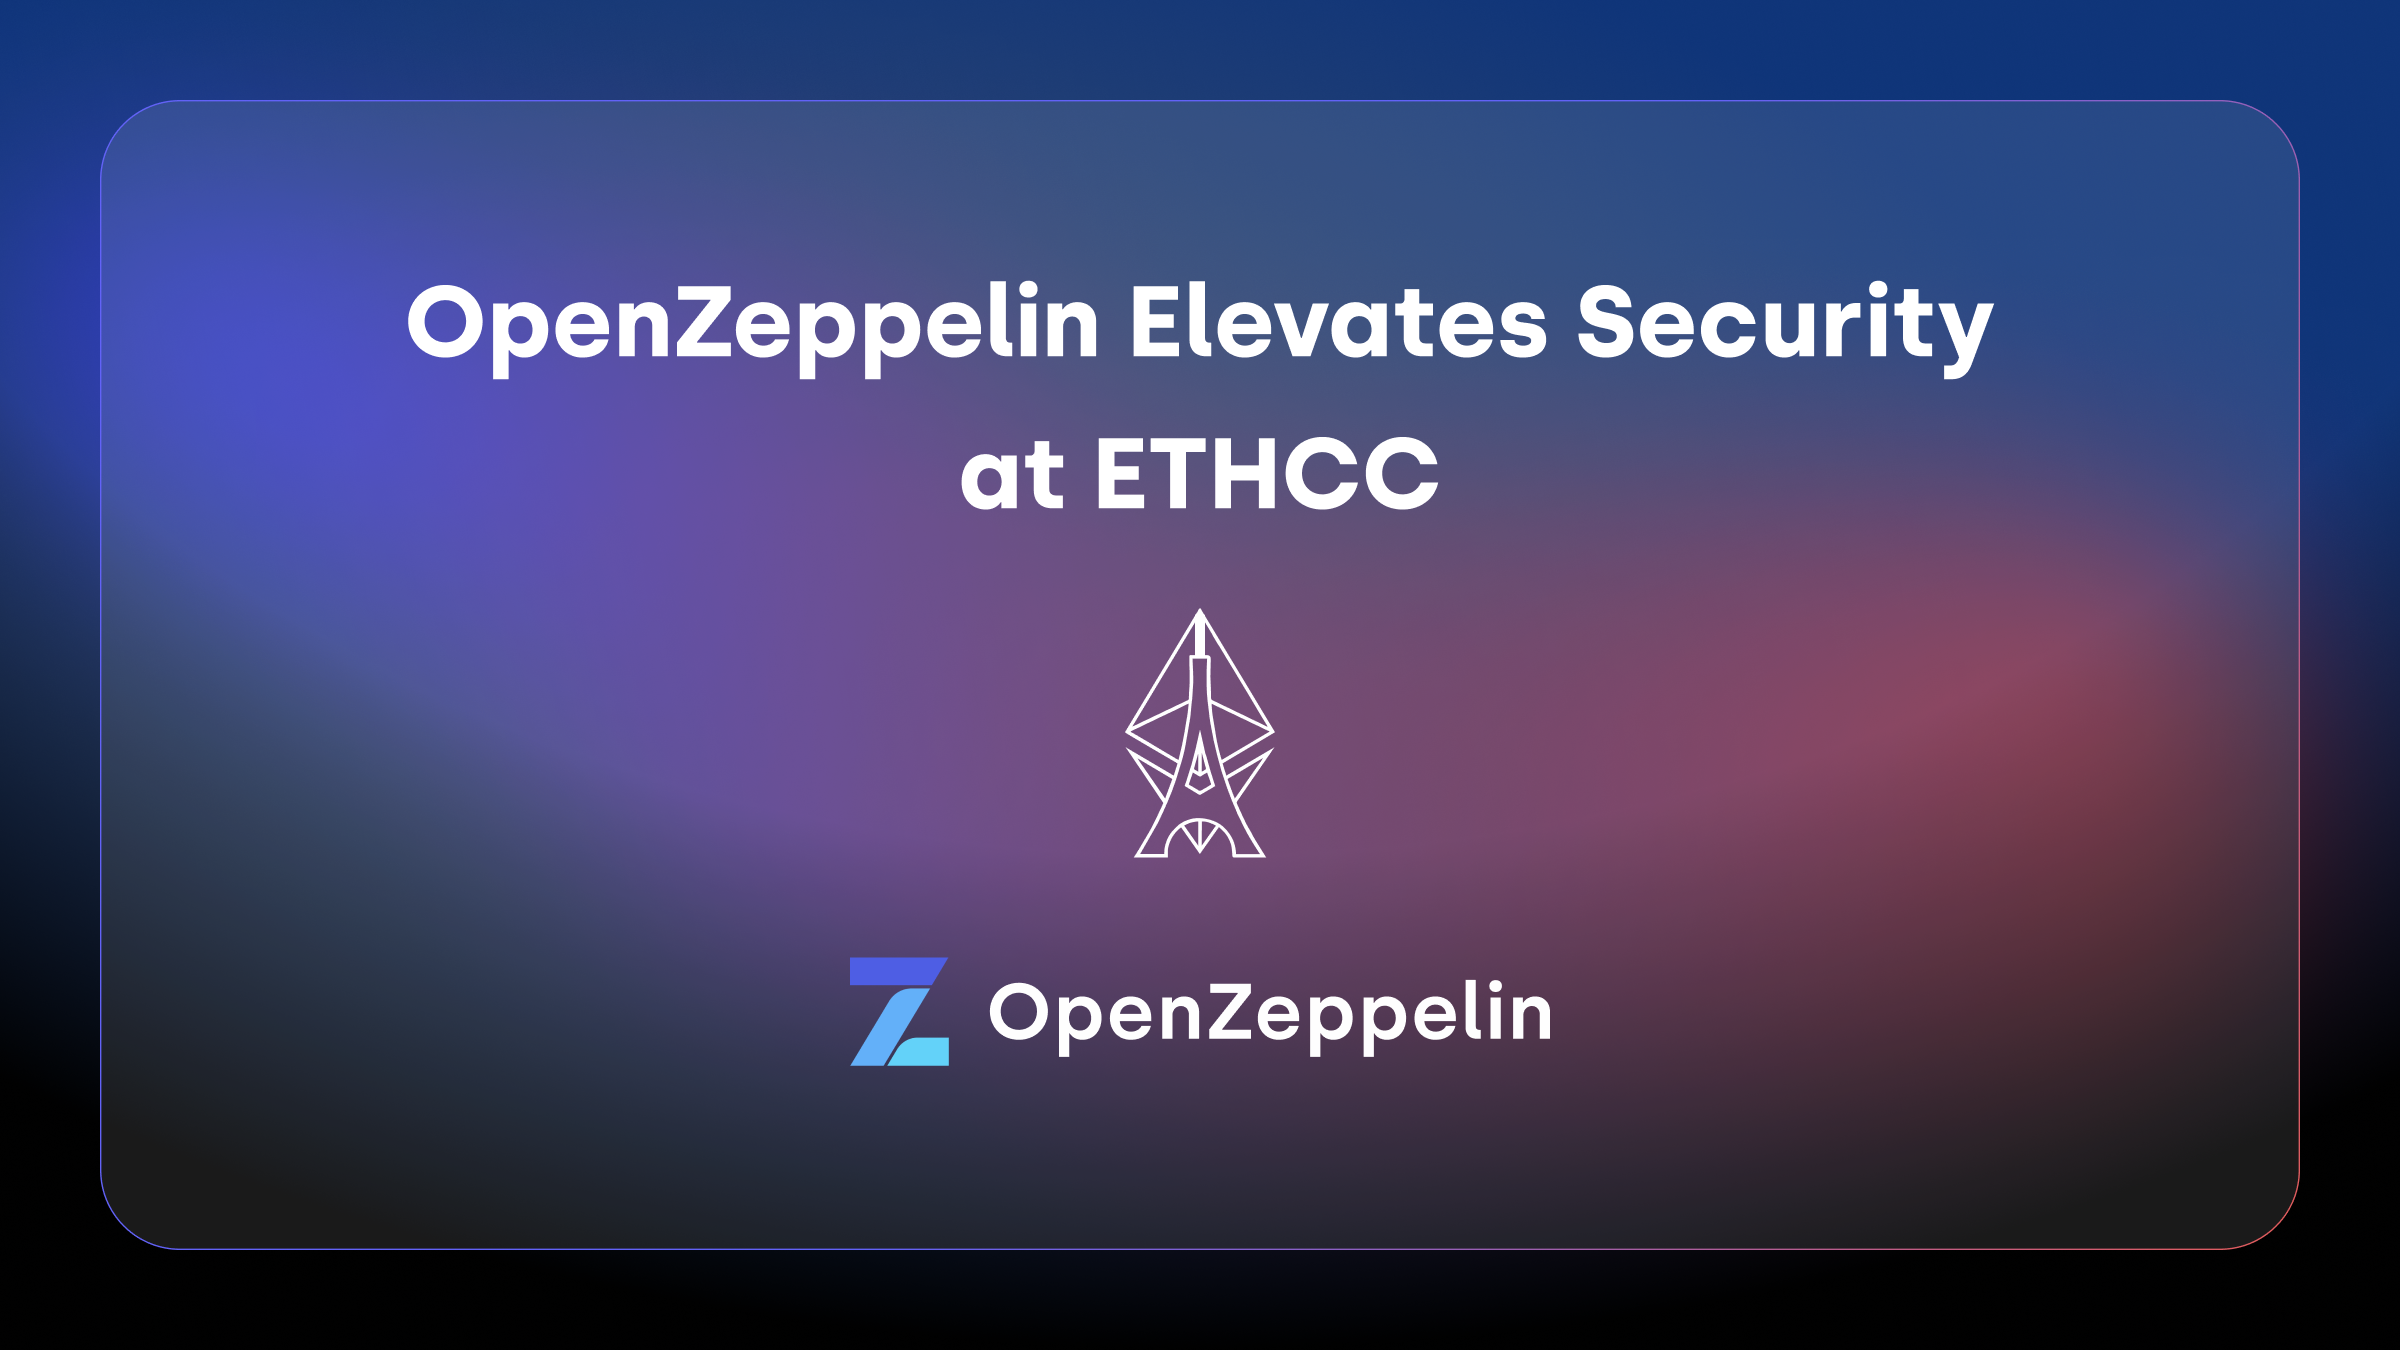 OpenZeppelin Elevates Security at ETHCC Featured Image